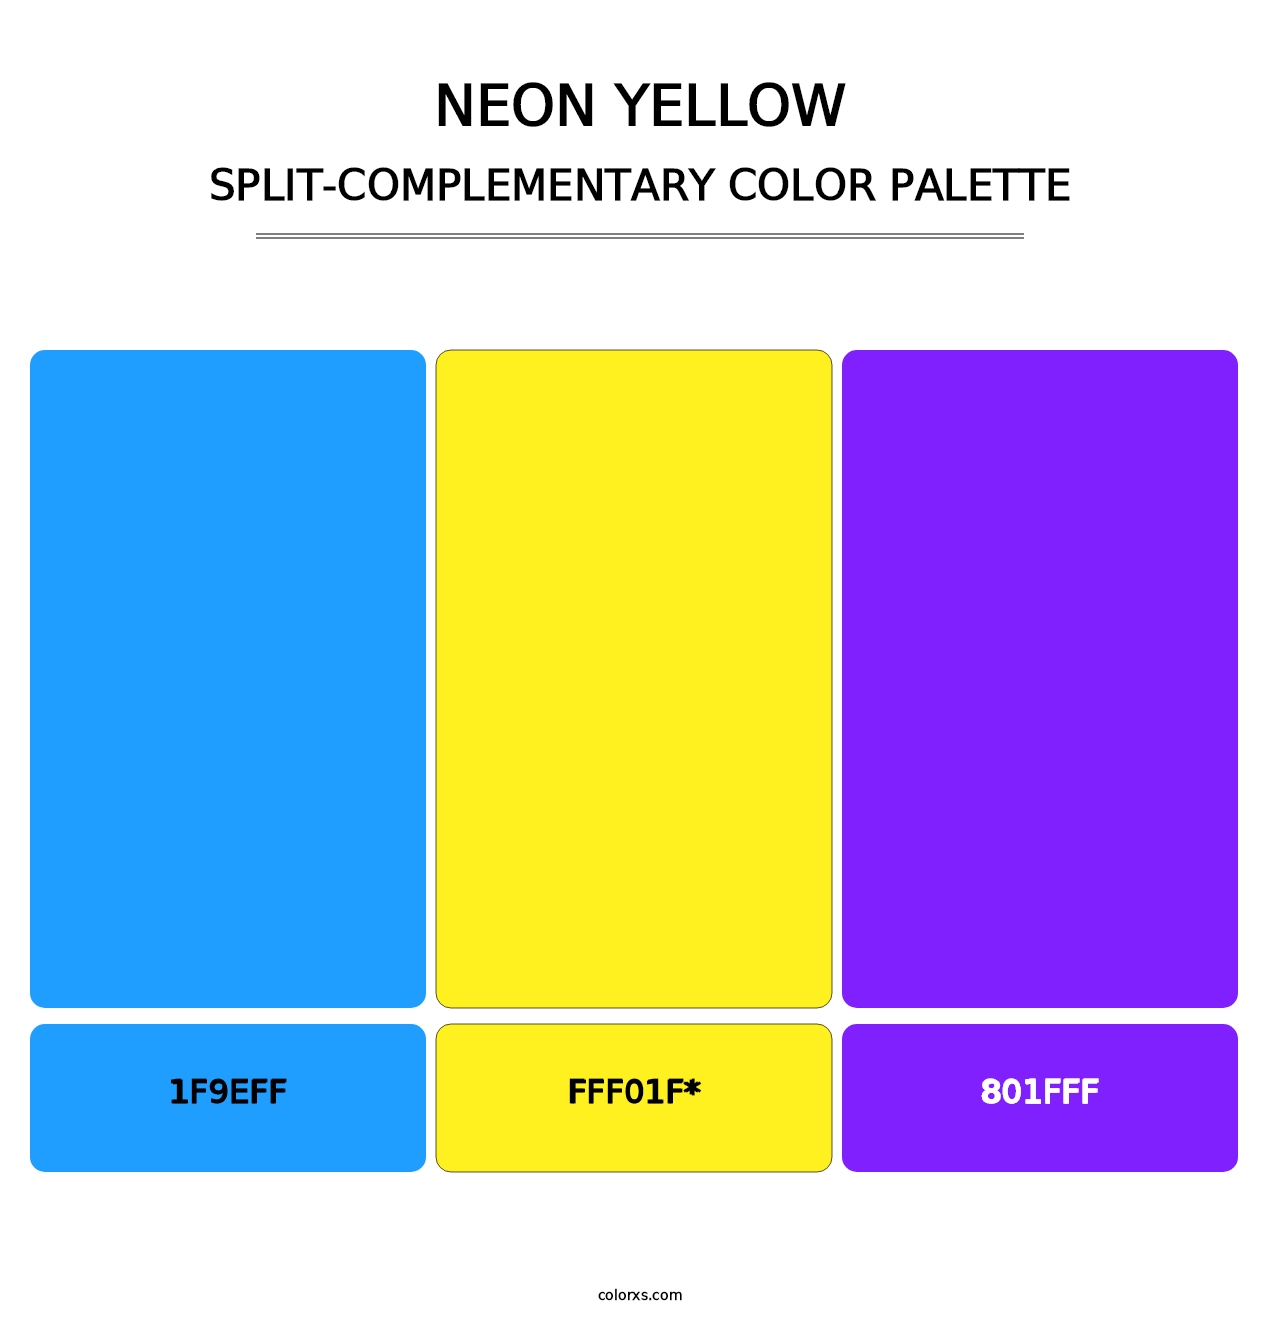 Neon Yellow - Split-Complementary Color Palette